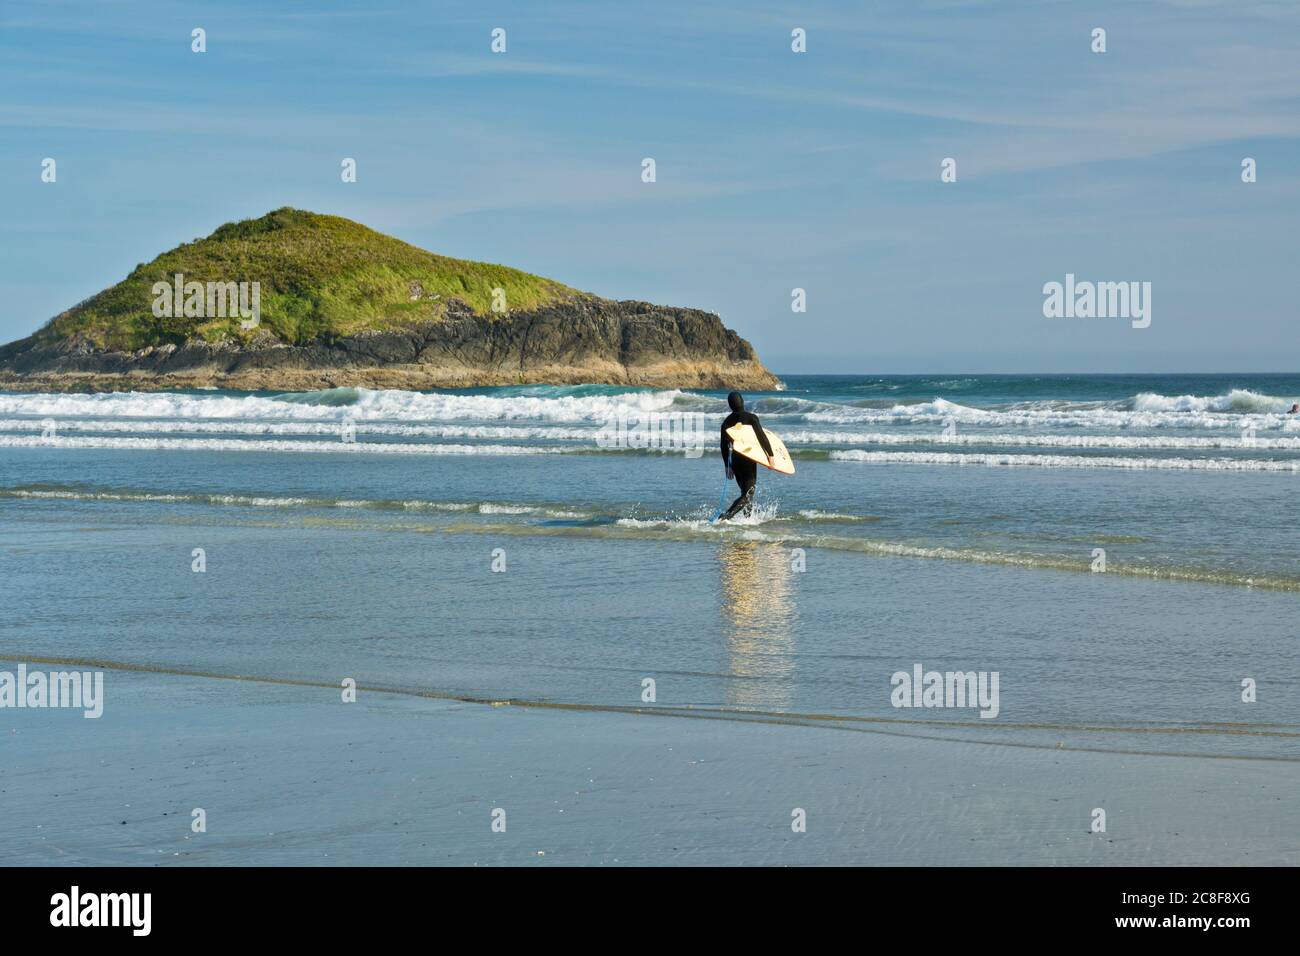 Man with surfboard heads out to ocean by Lovekin Rock at Long Beach, British Columbia, Canada.  In Pacific Rim National Park Reserve. Stock Photo